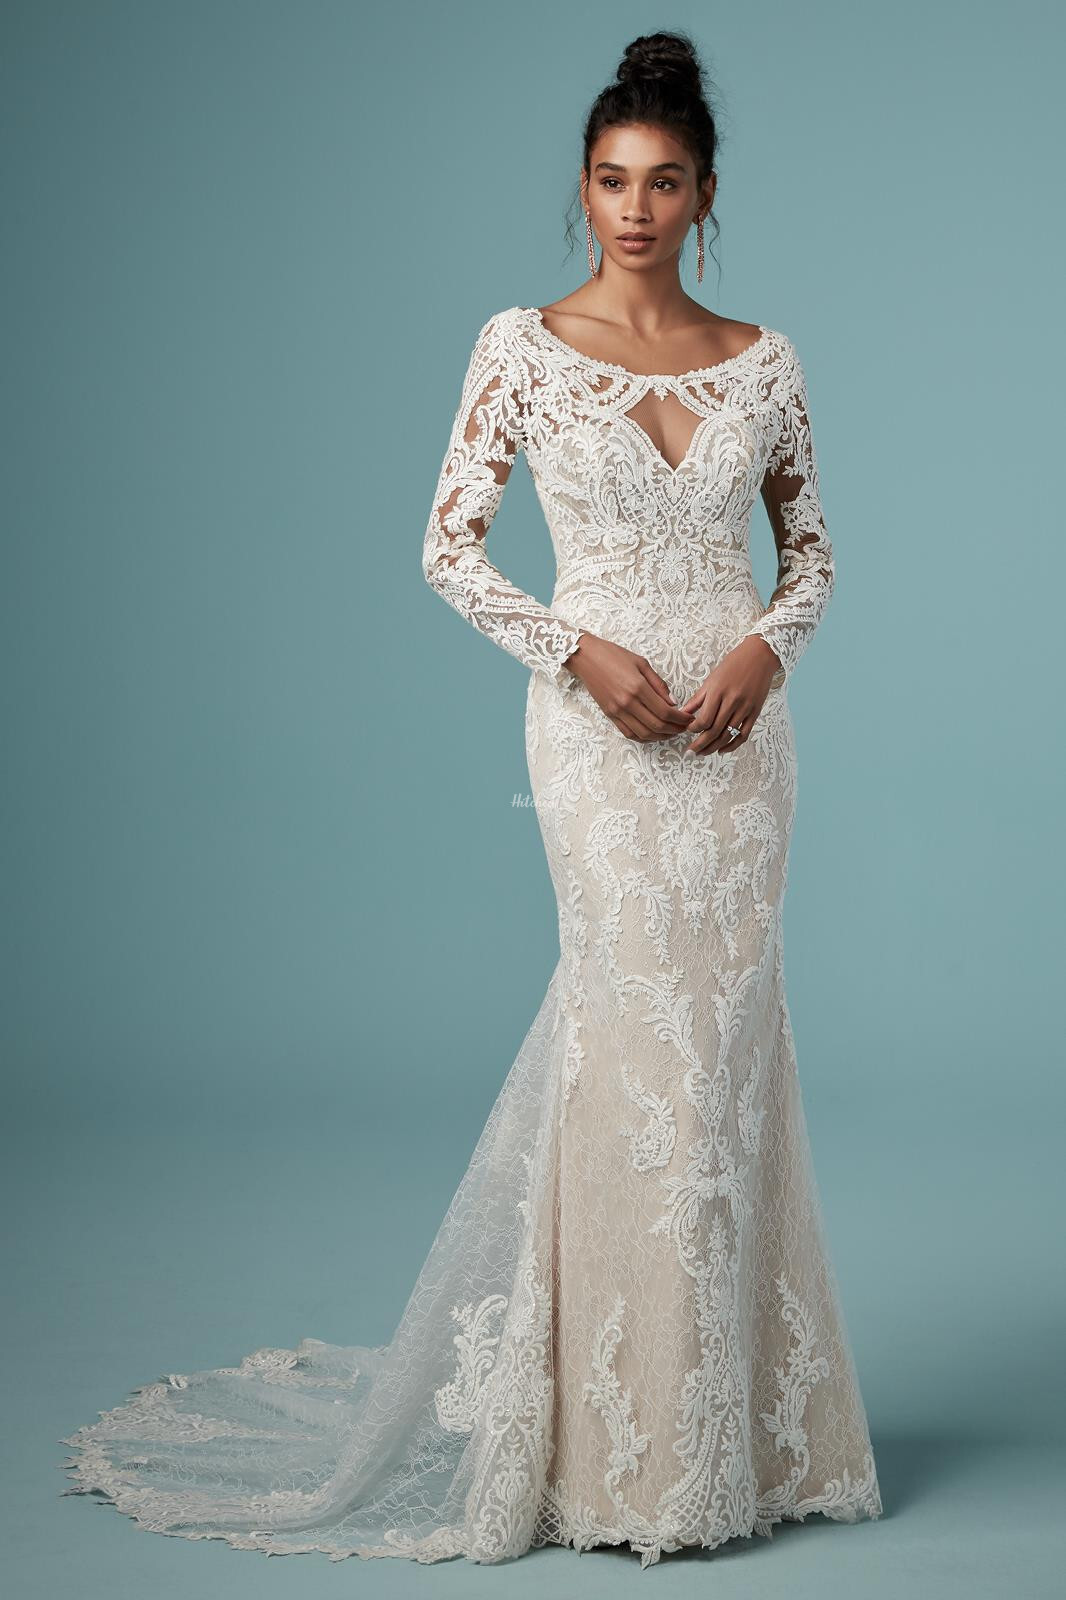 Cheyenne Wedding Dress from Maggie Sottero - hitched.co.uk